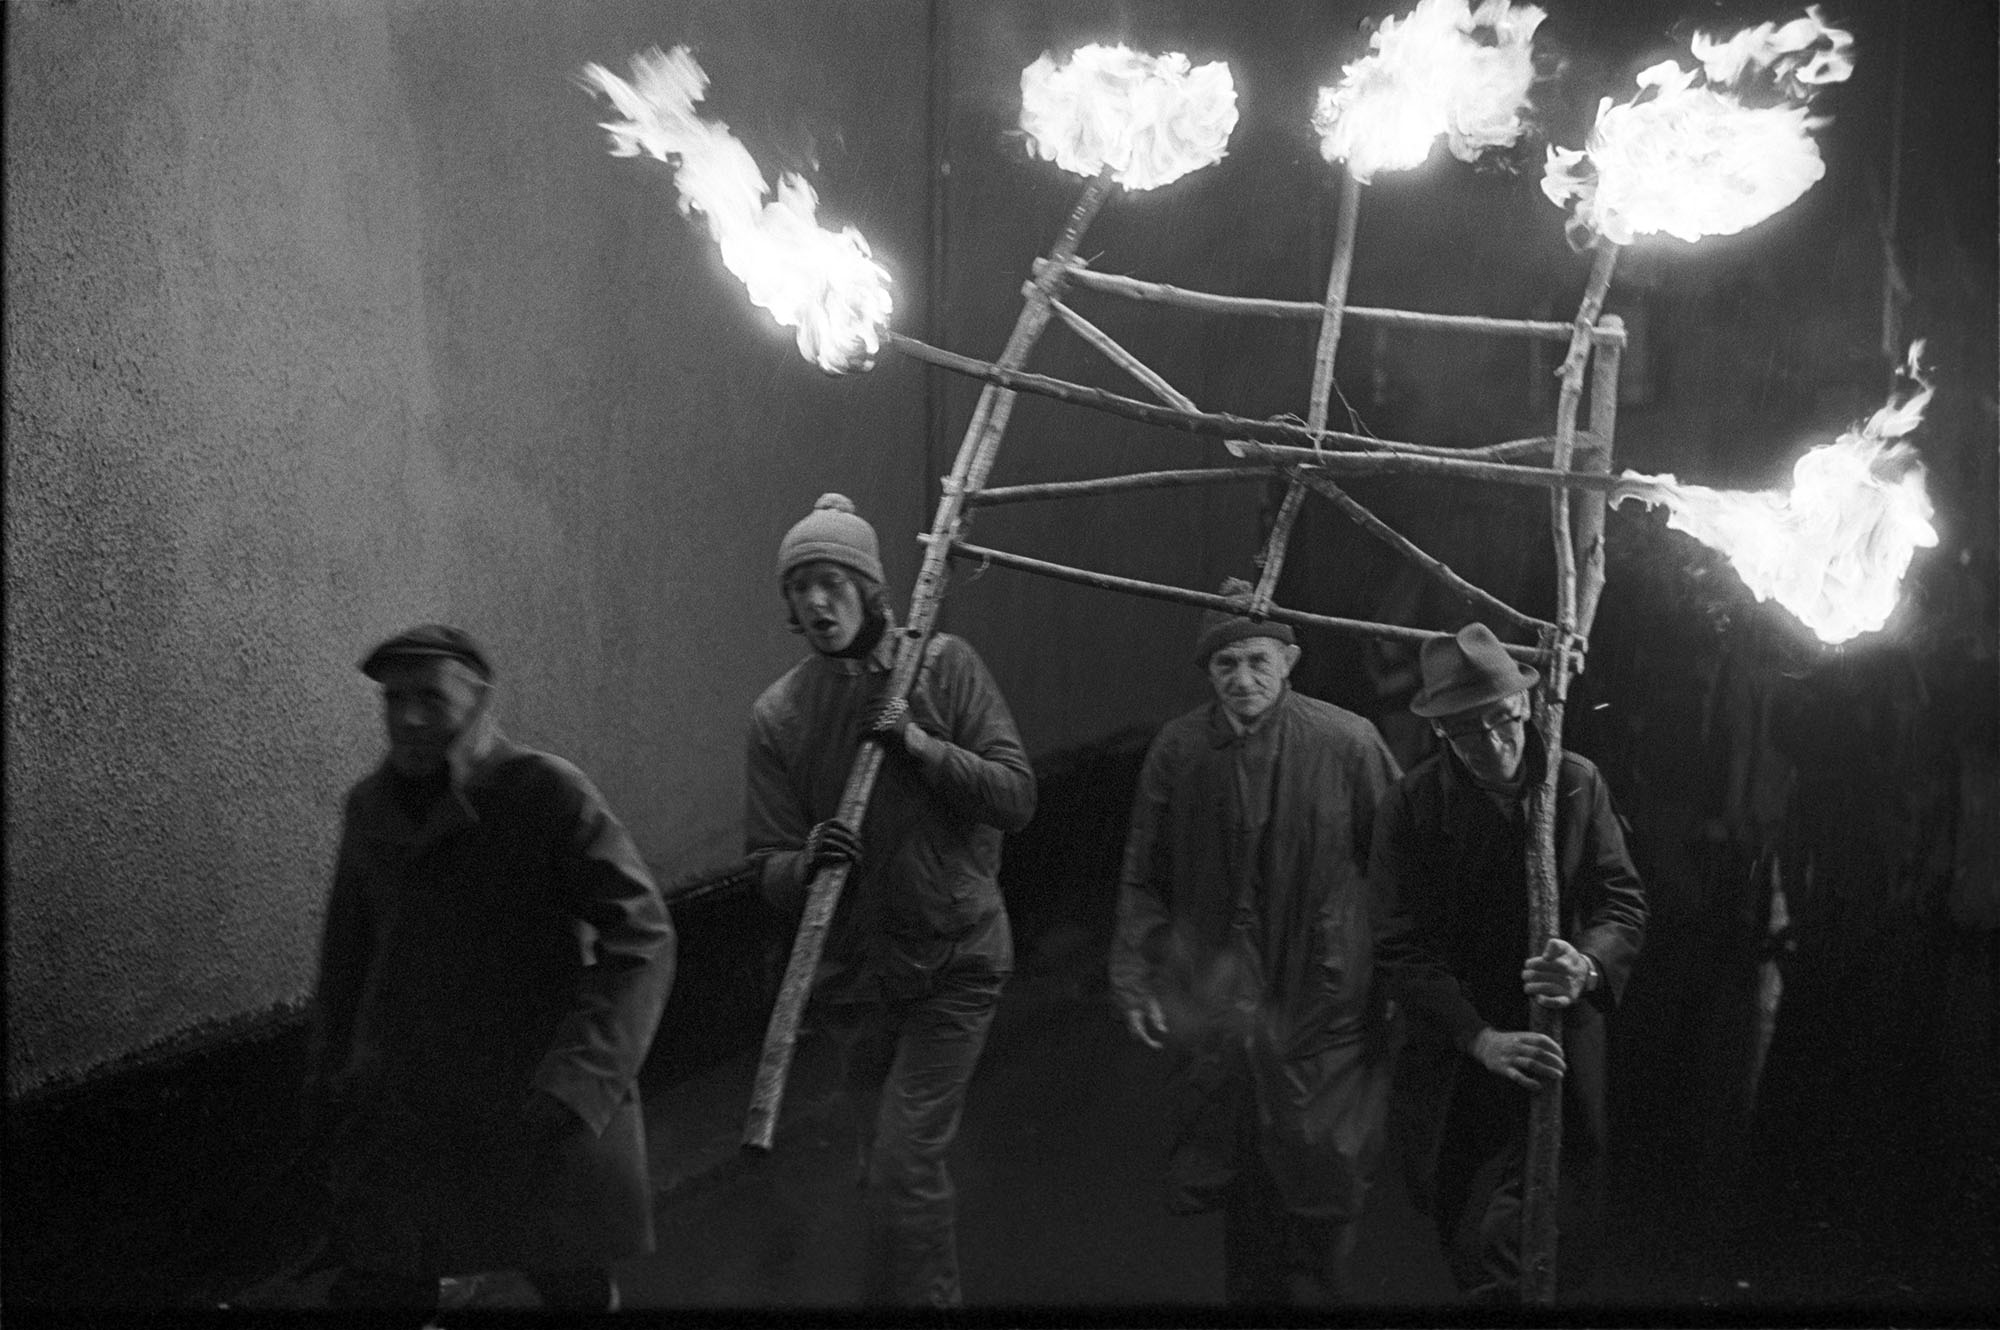 Men carrying frame of flaming torches at start of Carnival.
[Two men carrying a frame of flaming torches at the start of Hatherleigh Carnival.  The frame is made of tree branches. Other people are following in the parade.]